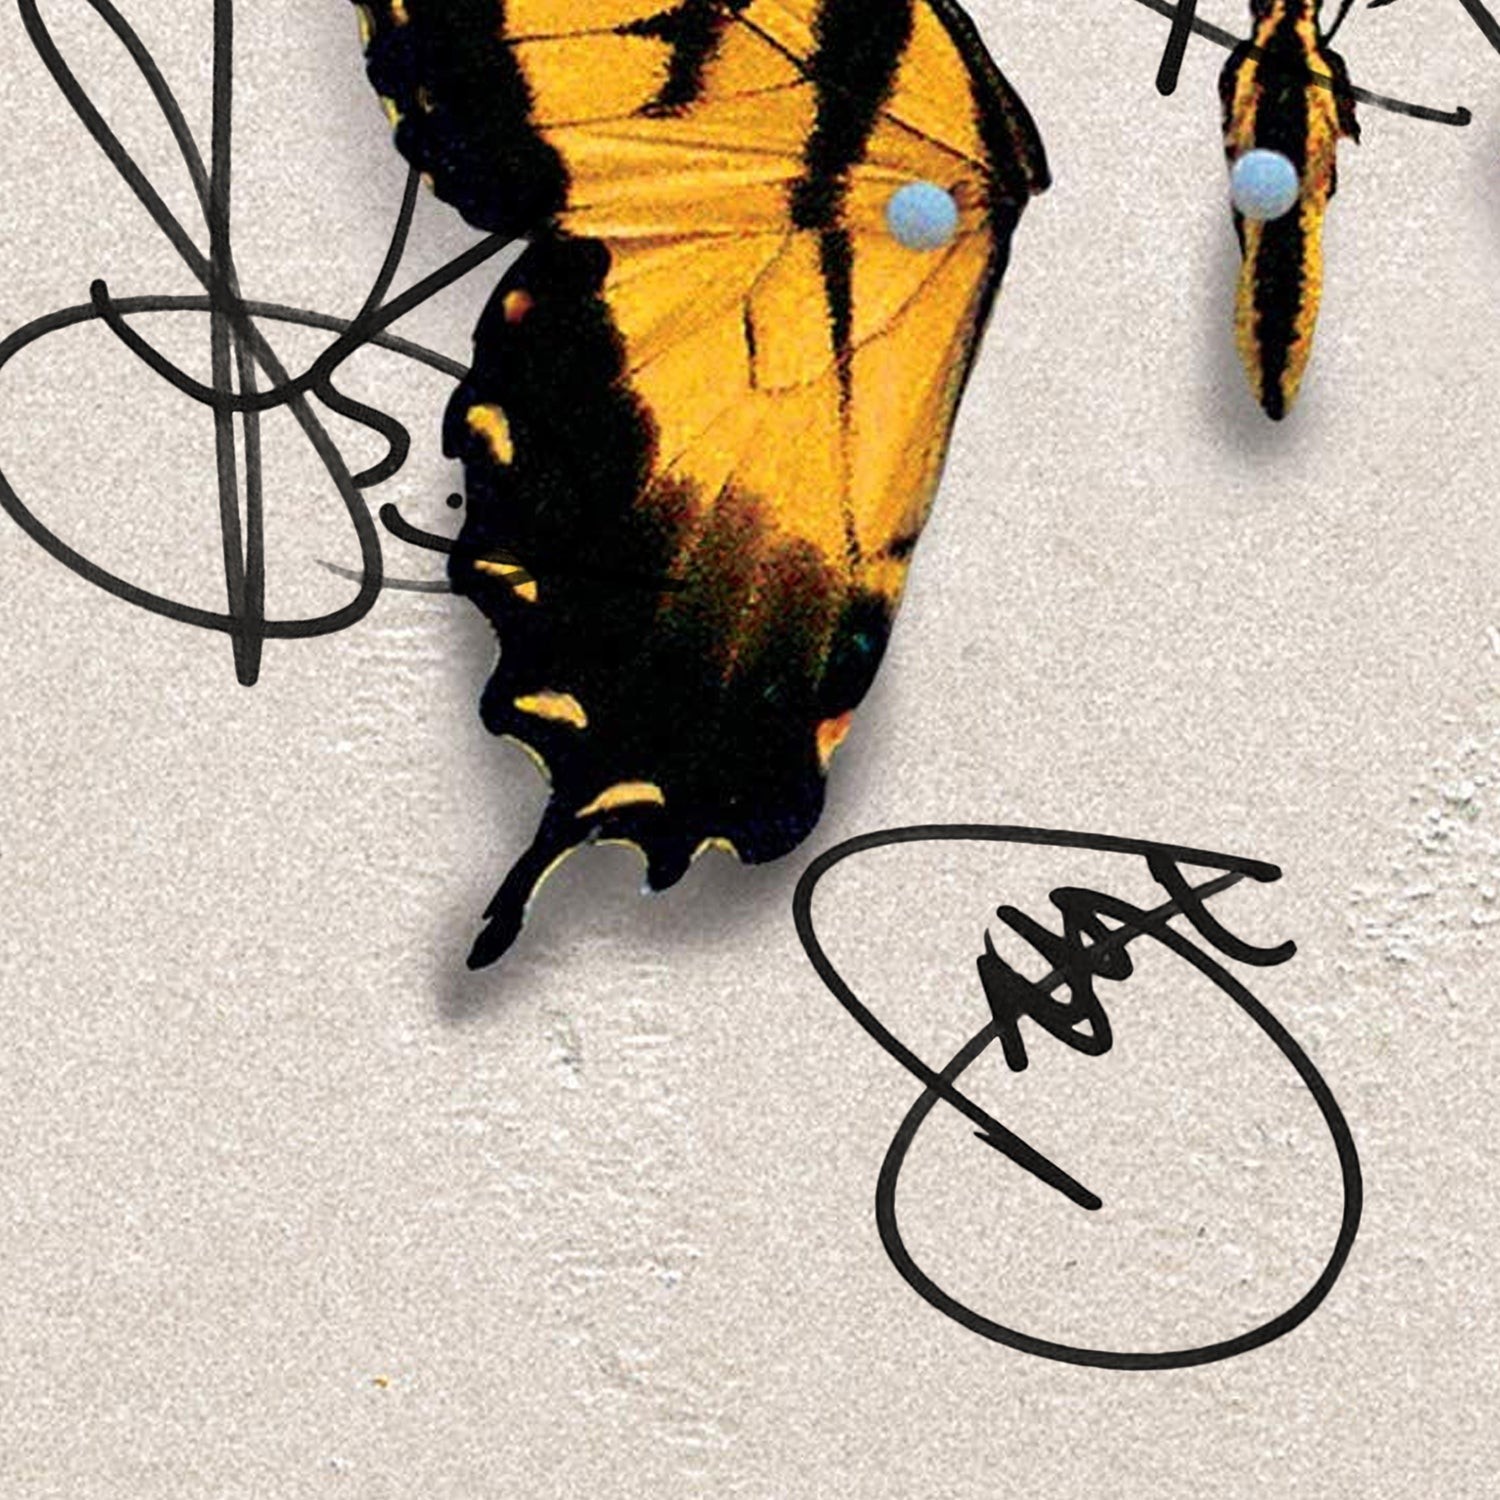 HAYLEY WILLIAMS PARAMORE BRAND NEW EYES CD Framed Signed autograph TOUGH!